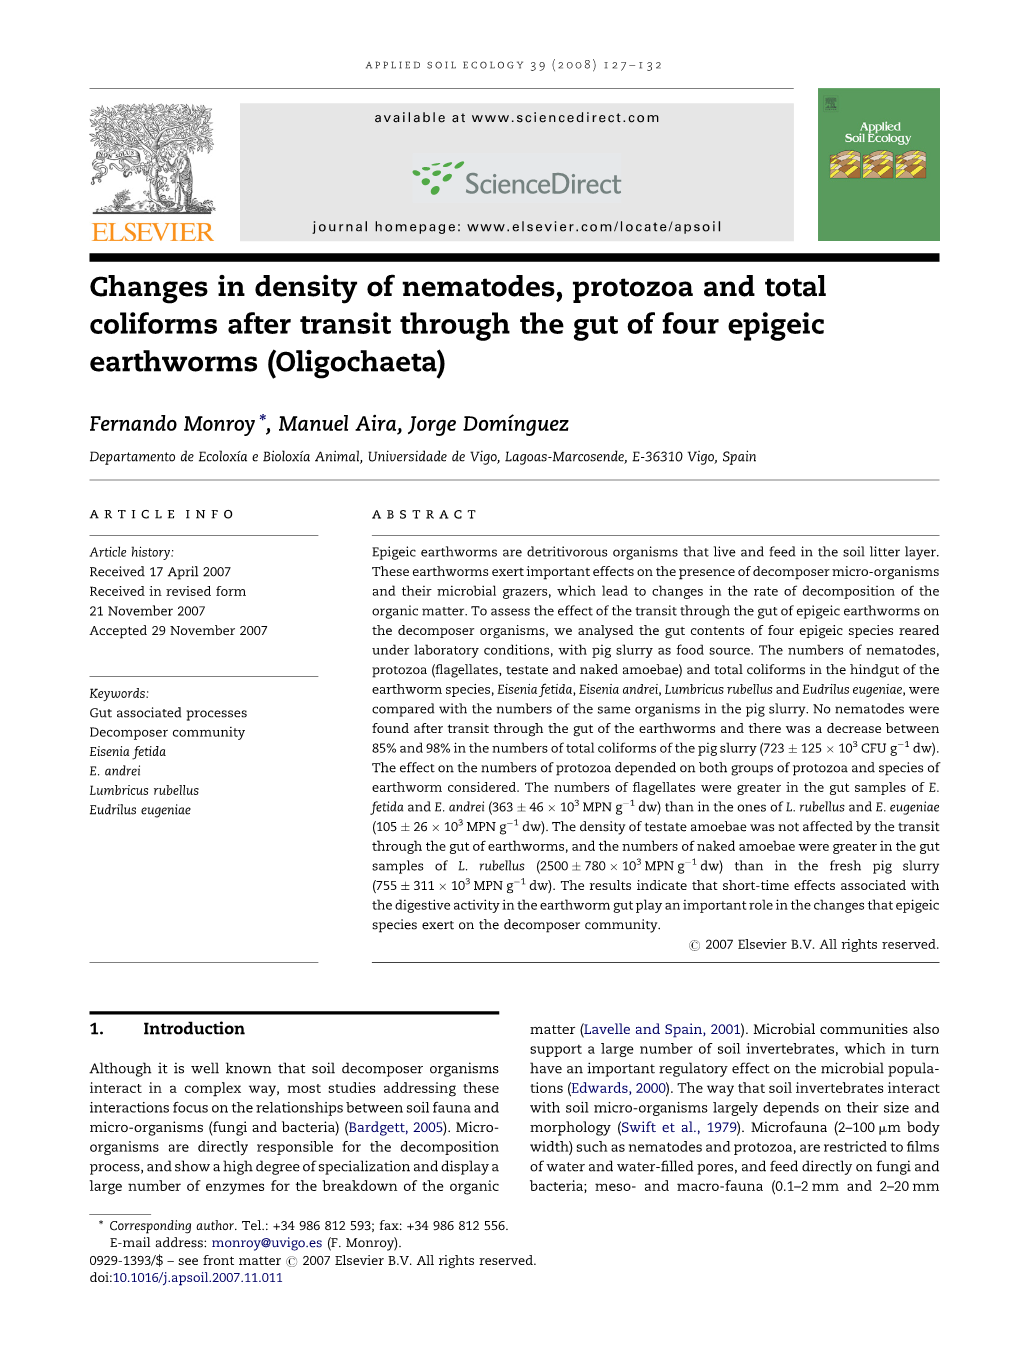 Changes in Density of Nematodes, Protozoa and Total Coliforms After Transit Through the Gut of Four Epigeic Earthworms (Oligochaeta)